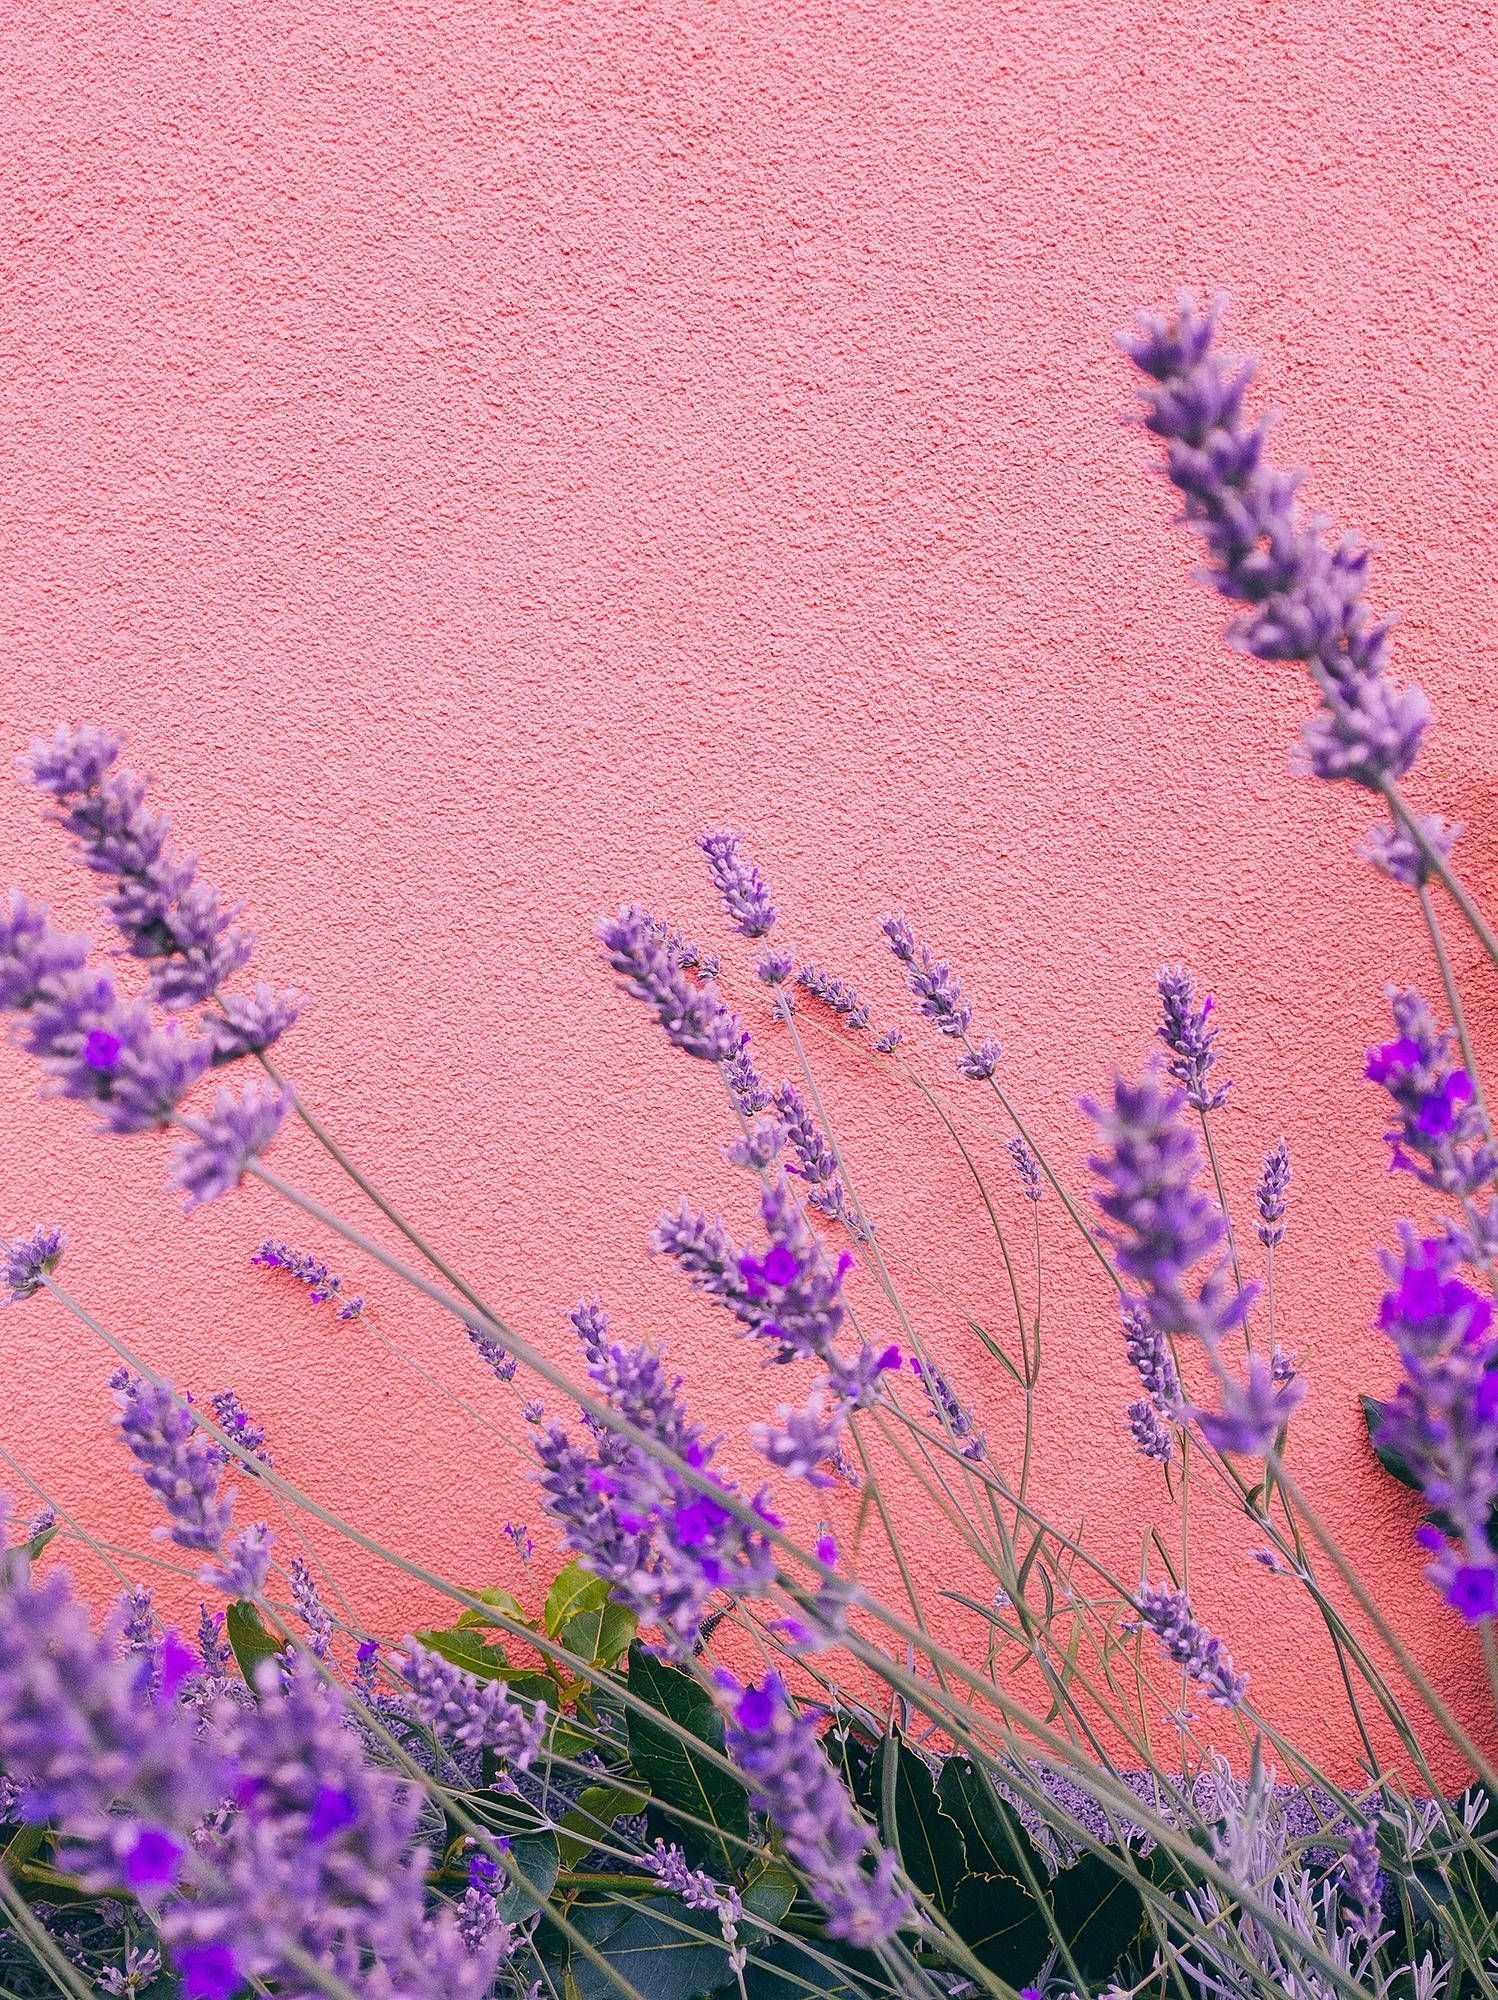 A pink wall with lavender flowers in the foreground. - Lavender